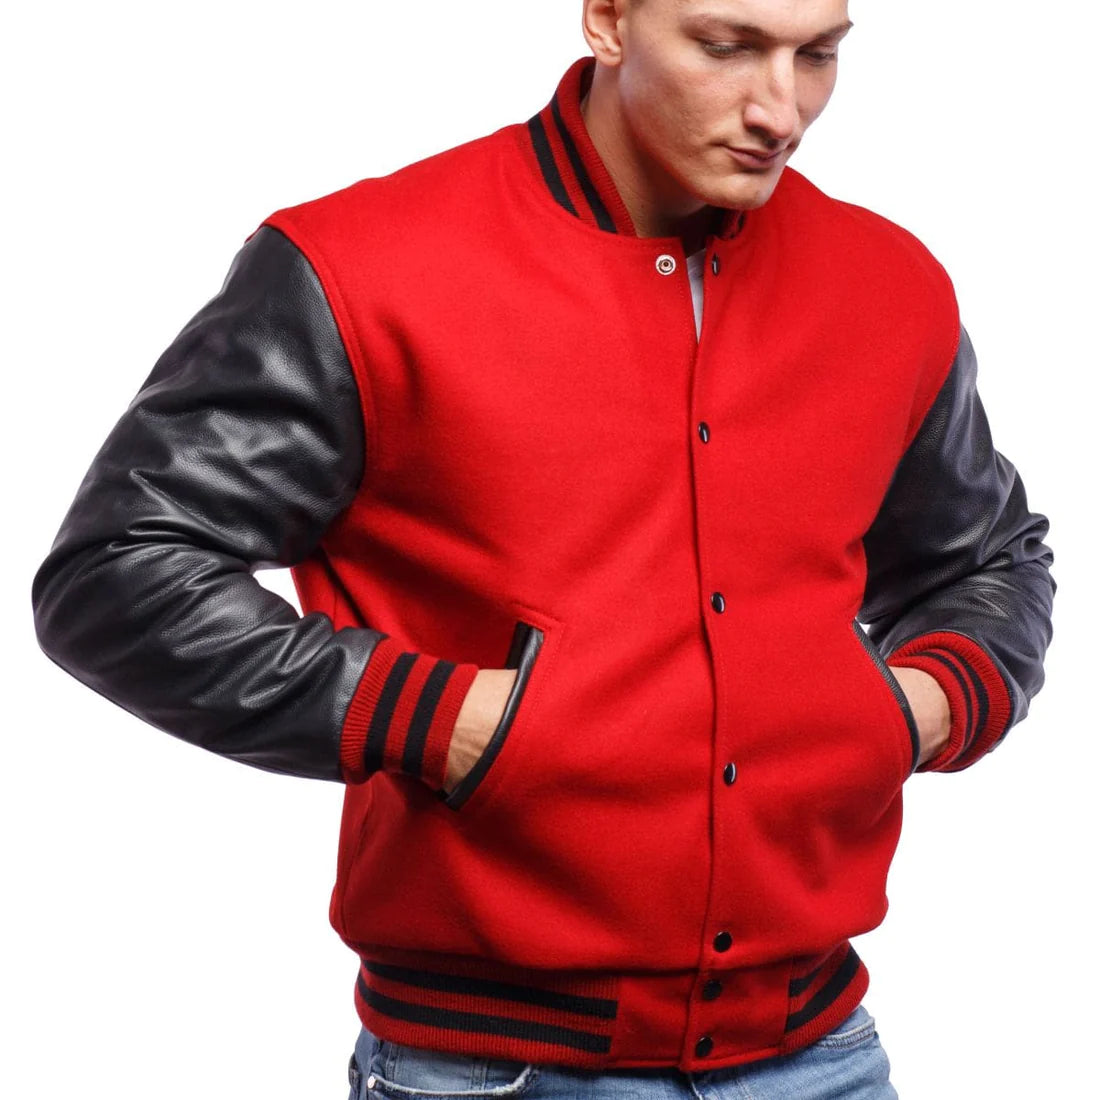 Mens-Red-And-Black-Leather-Varsity-Jacket-Front